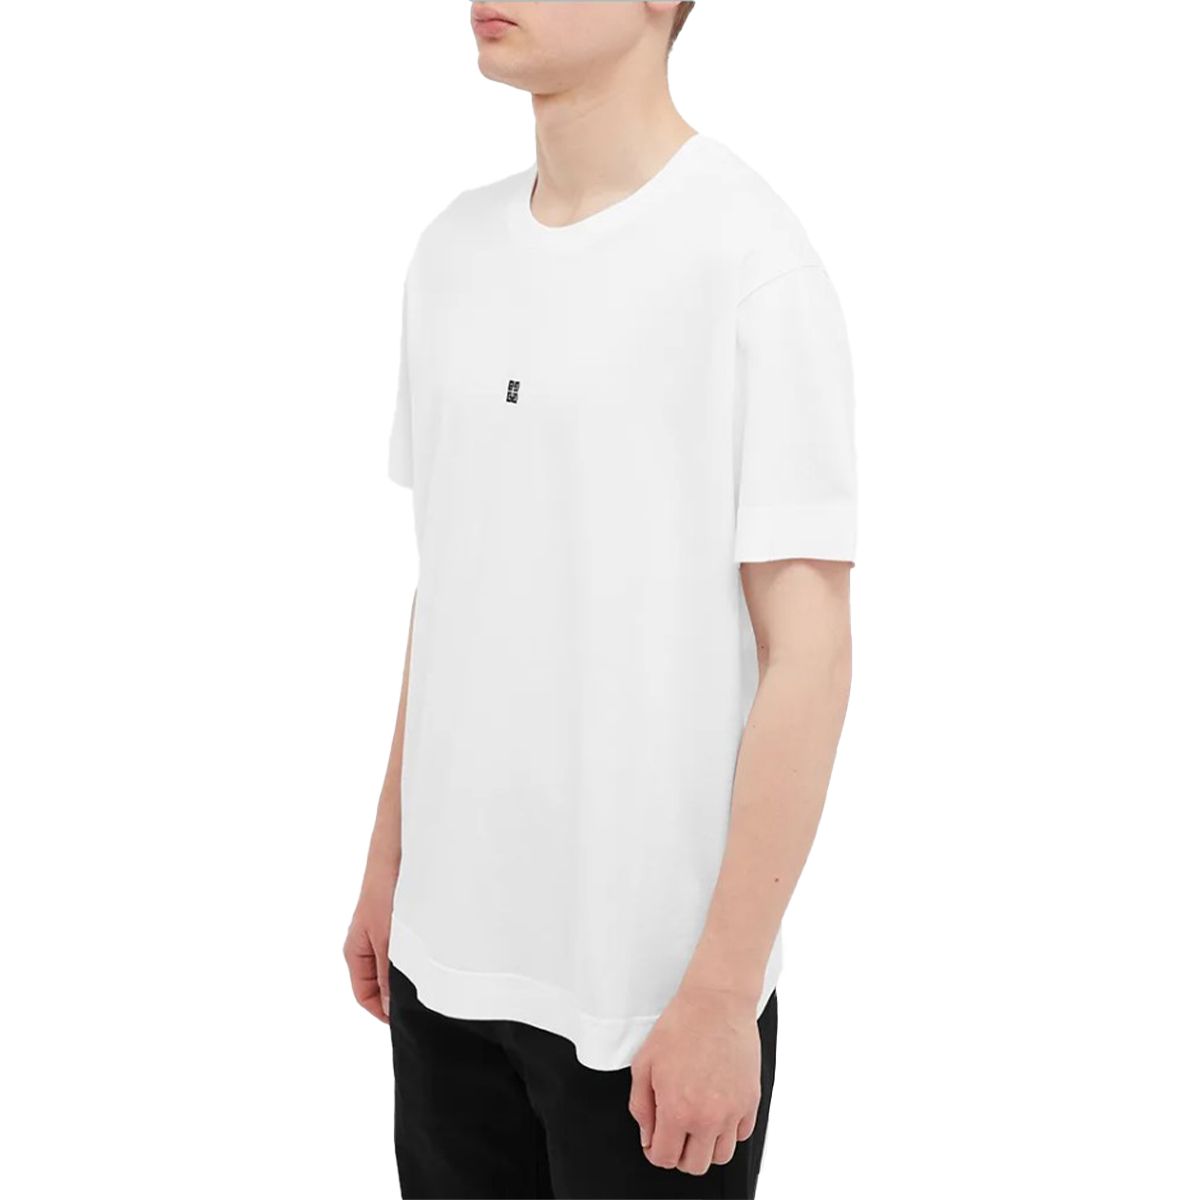 Contrast 4G Embroidery T-Shirt